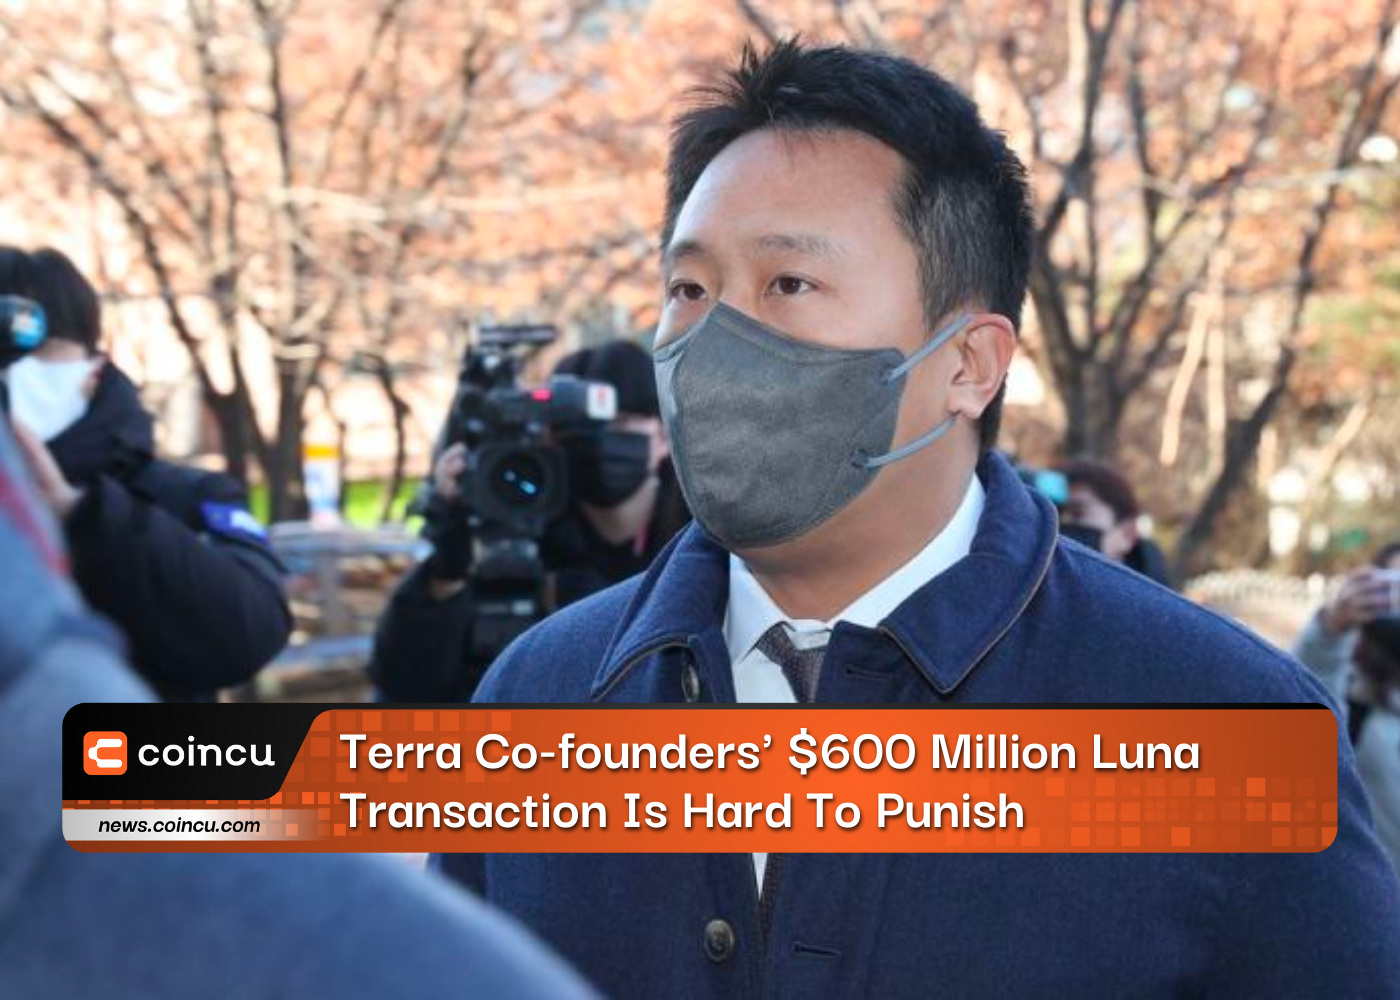 Terra Co-founders' $600 Million Luna Transaction Is Hard To Punish